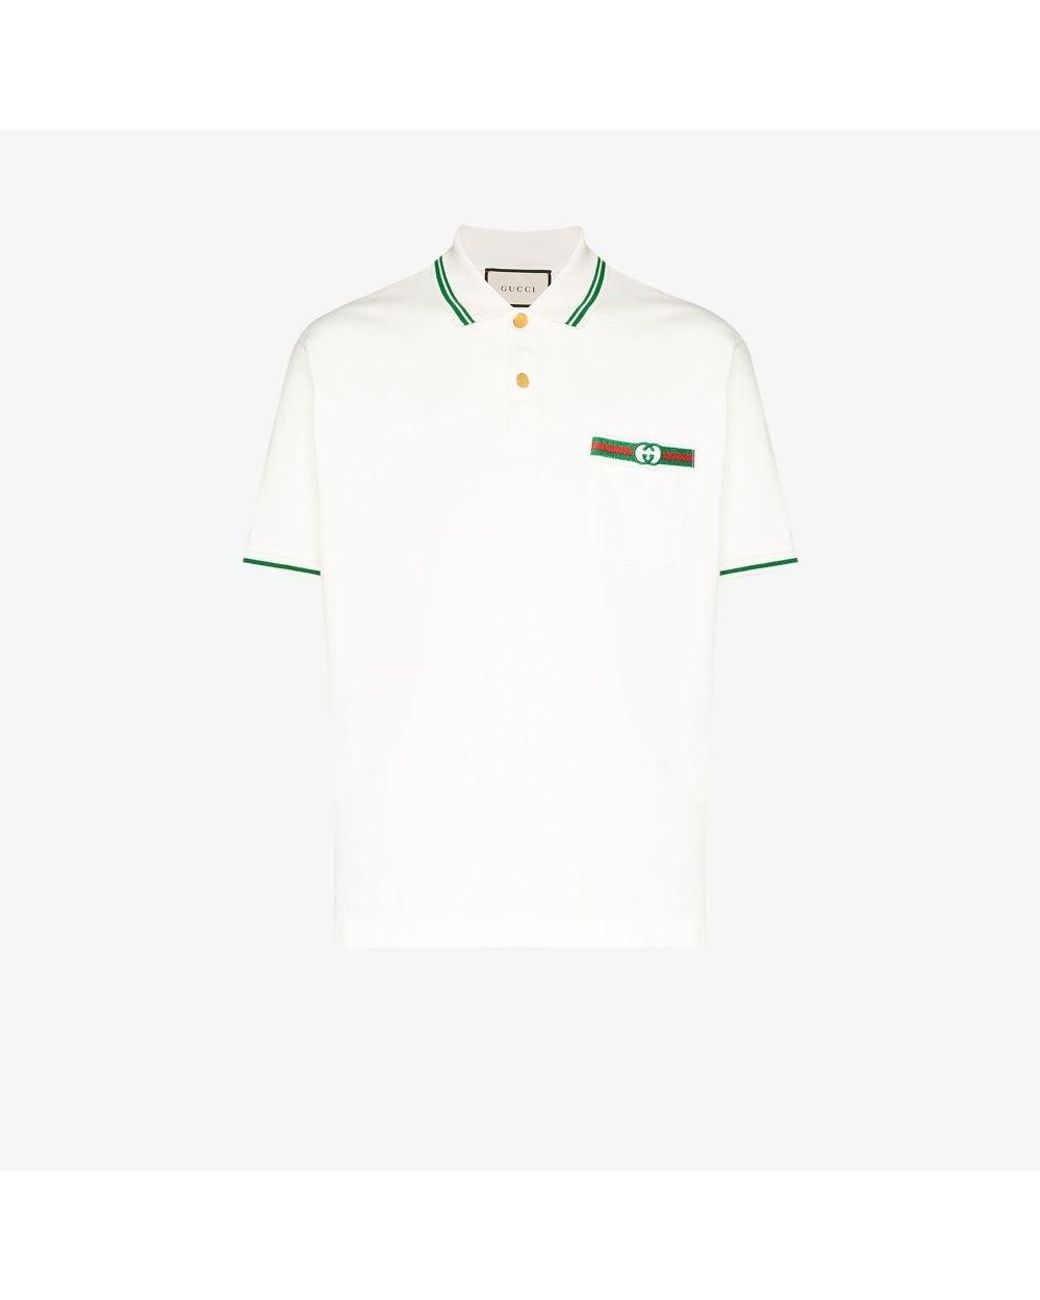 Gucci Cotton Short-sleeve Polo Shirt in White for Men - Lyst